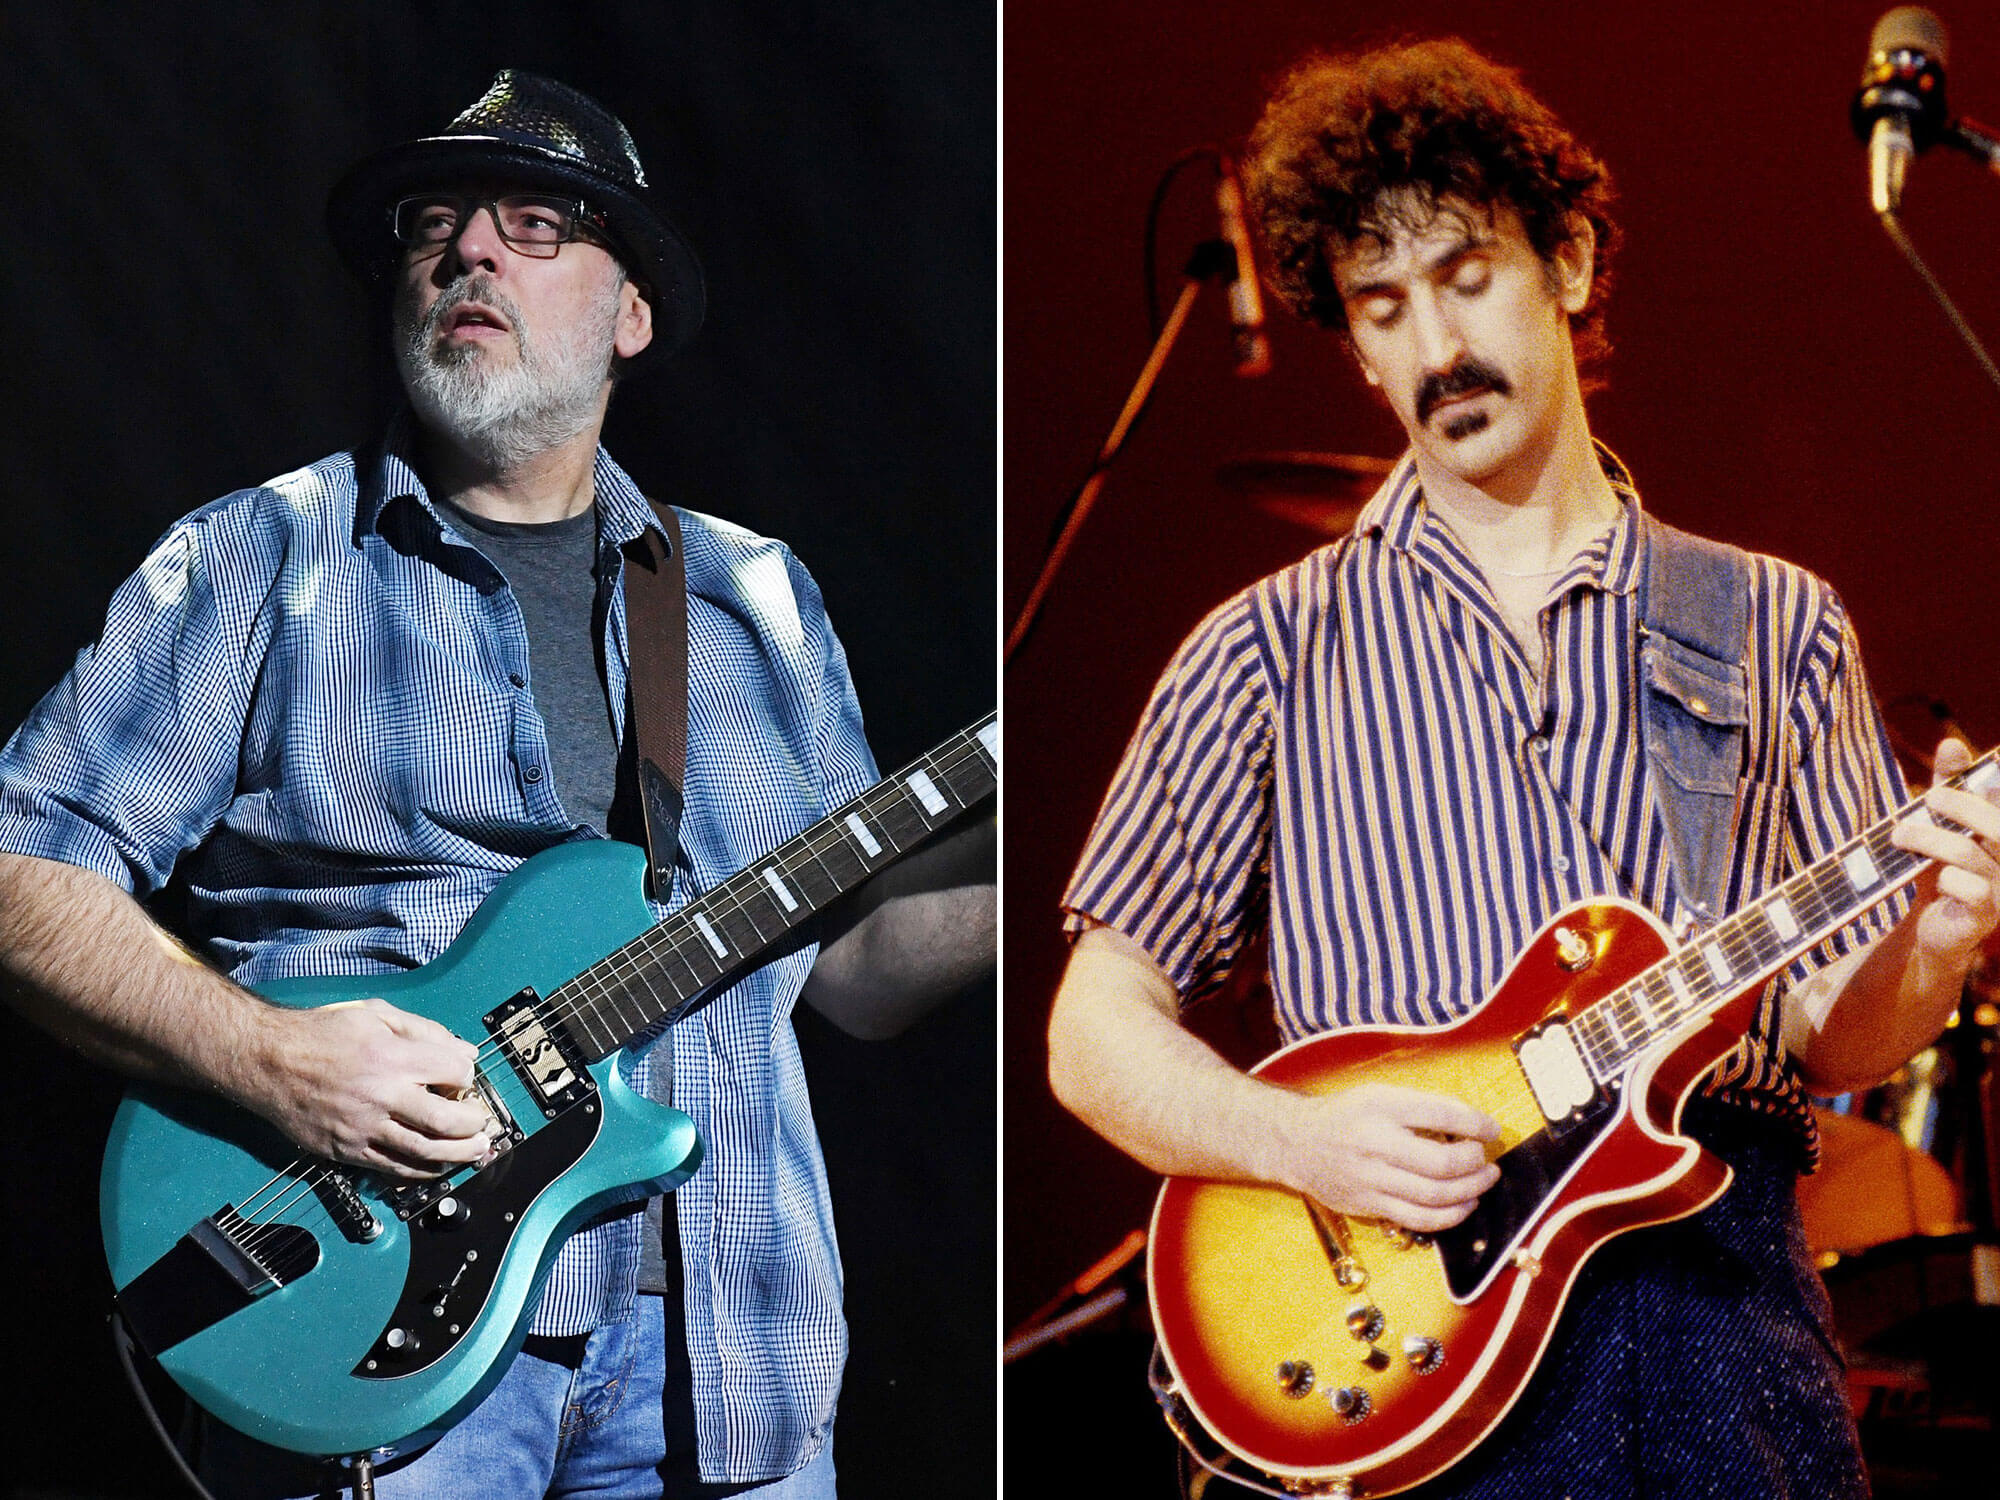 [L-R] Mike Keneally and Frank Zappa